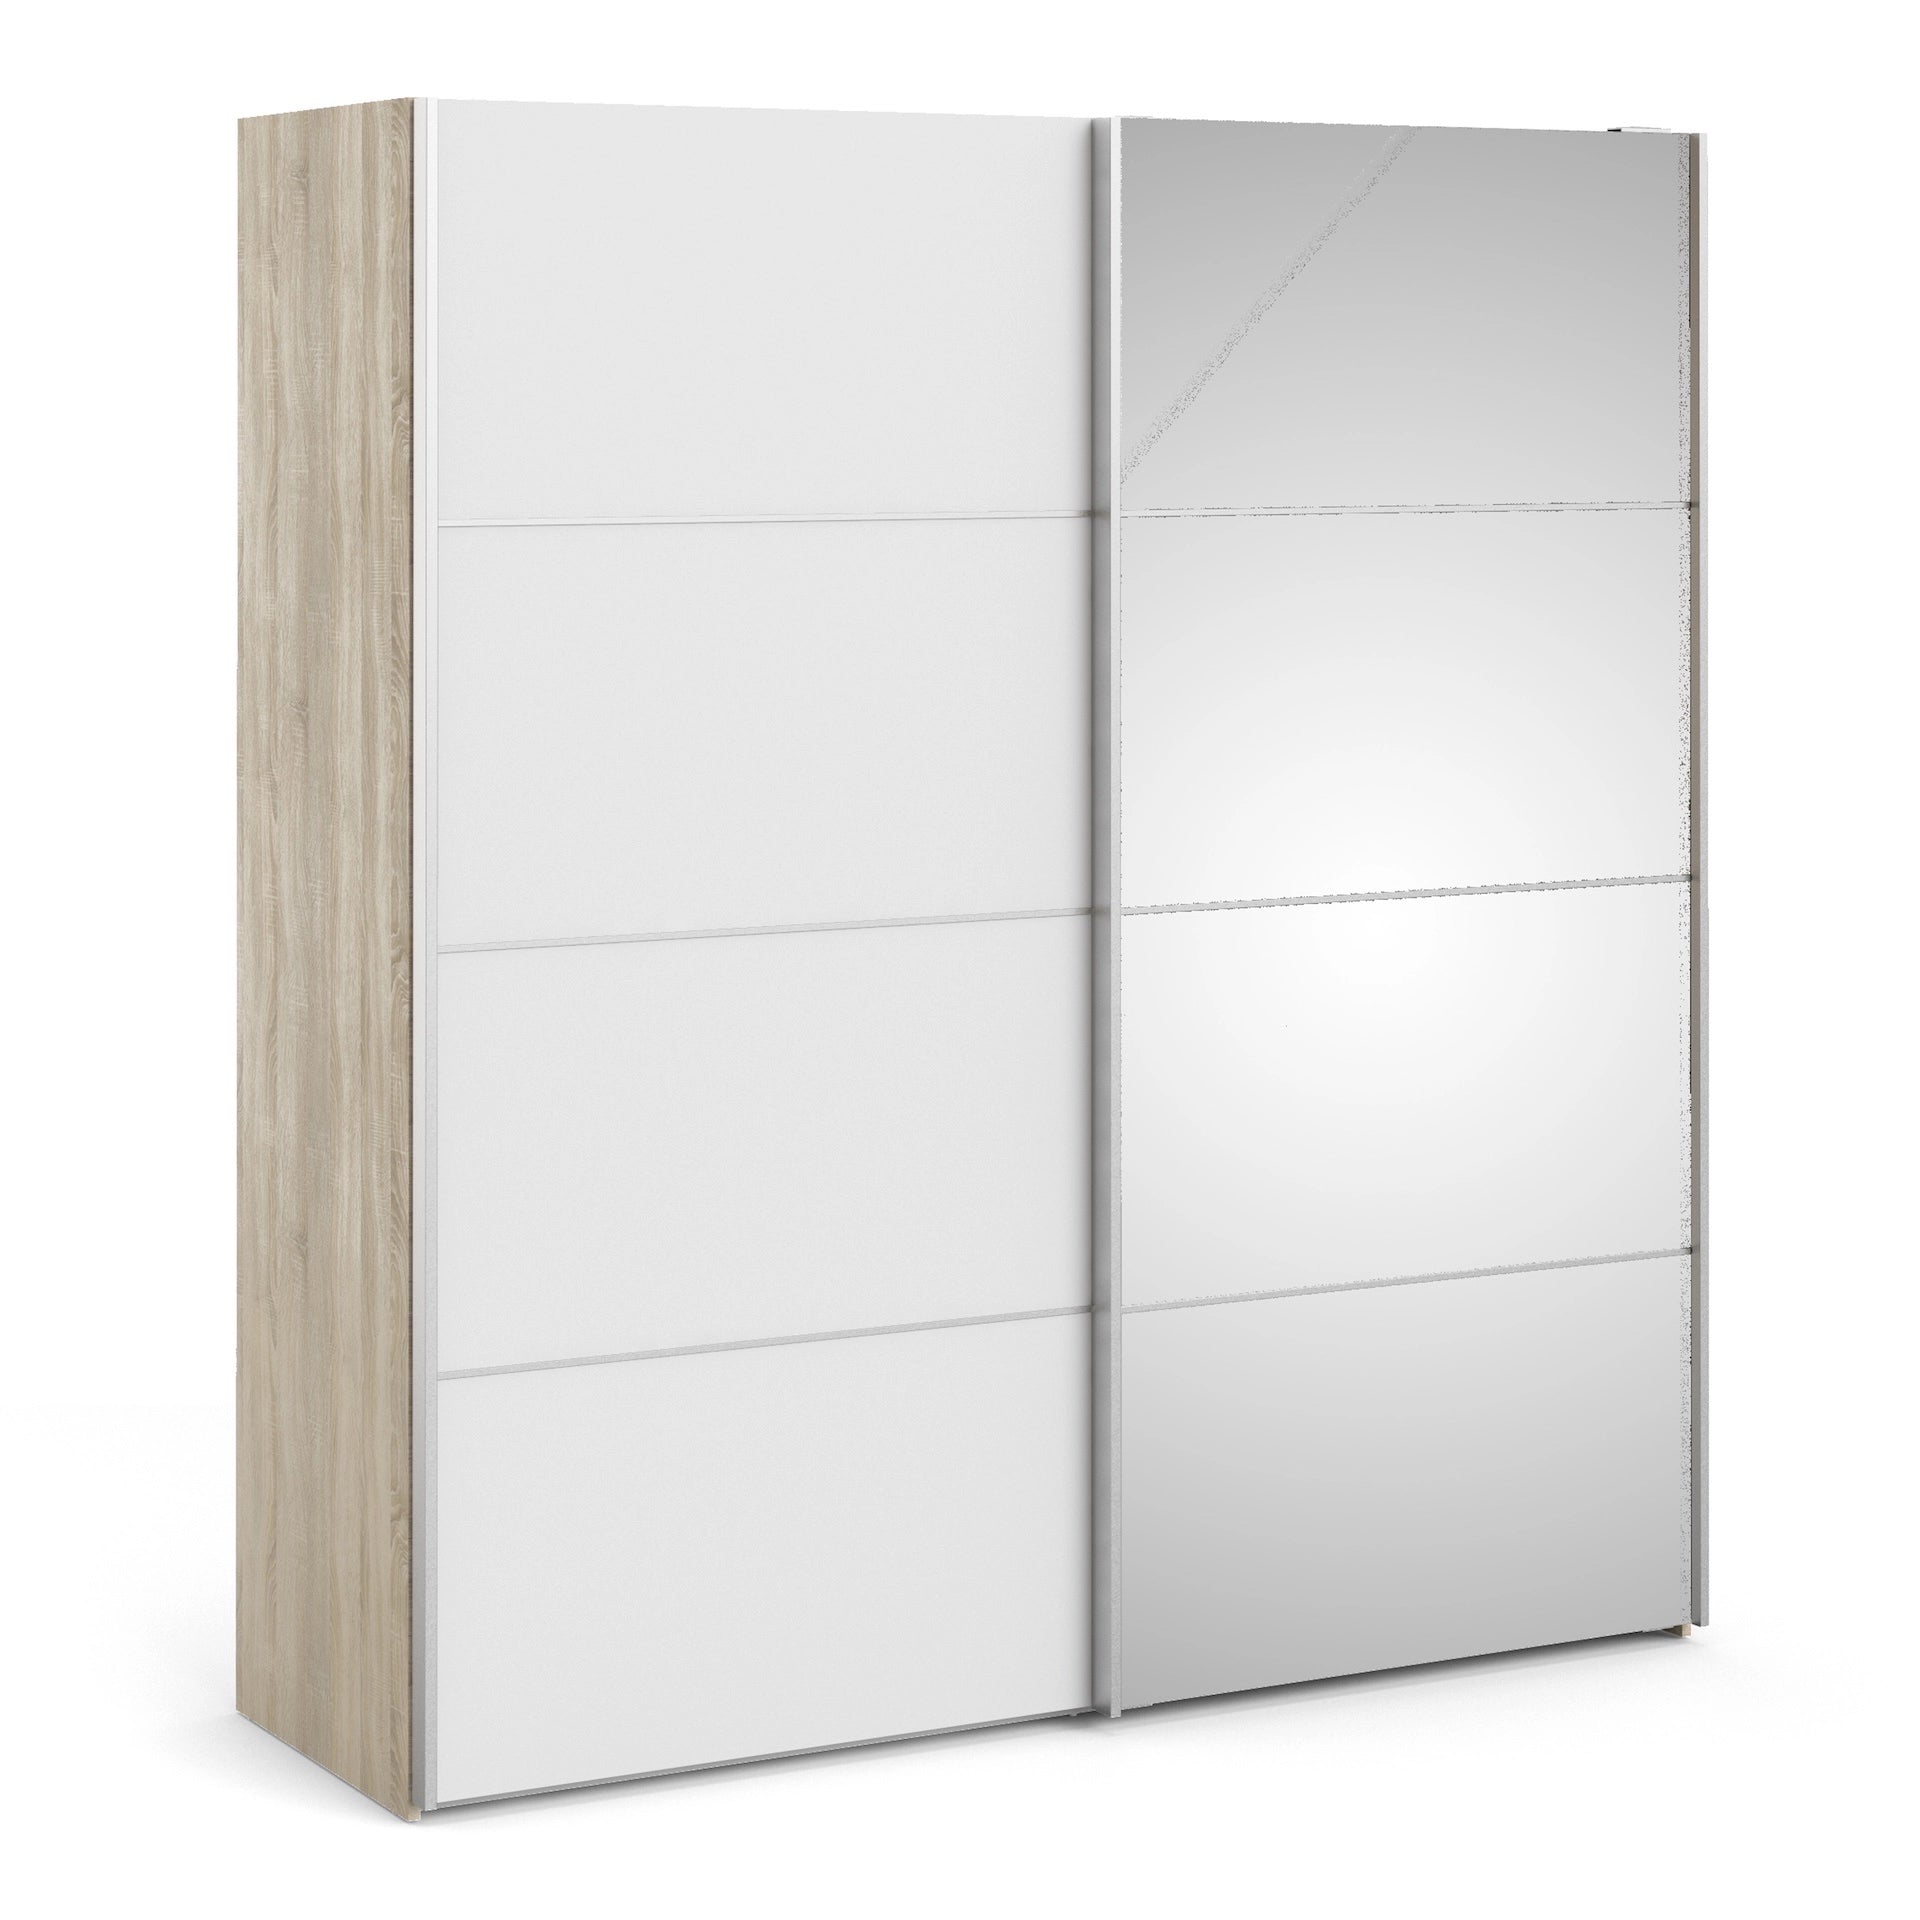 Furniture To Go Verona Sliding Wardrobe 180cm in Oak with White & Mirror Doors with 5 Shelves